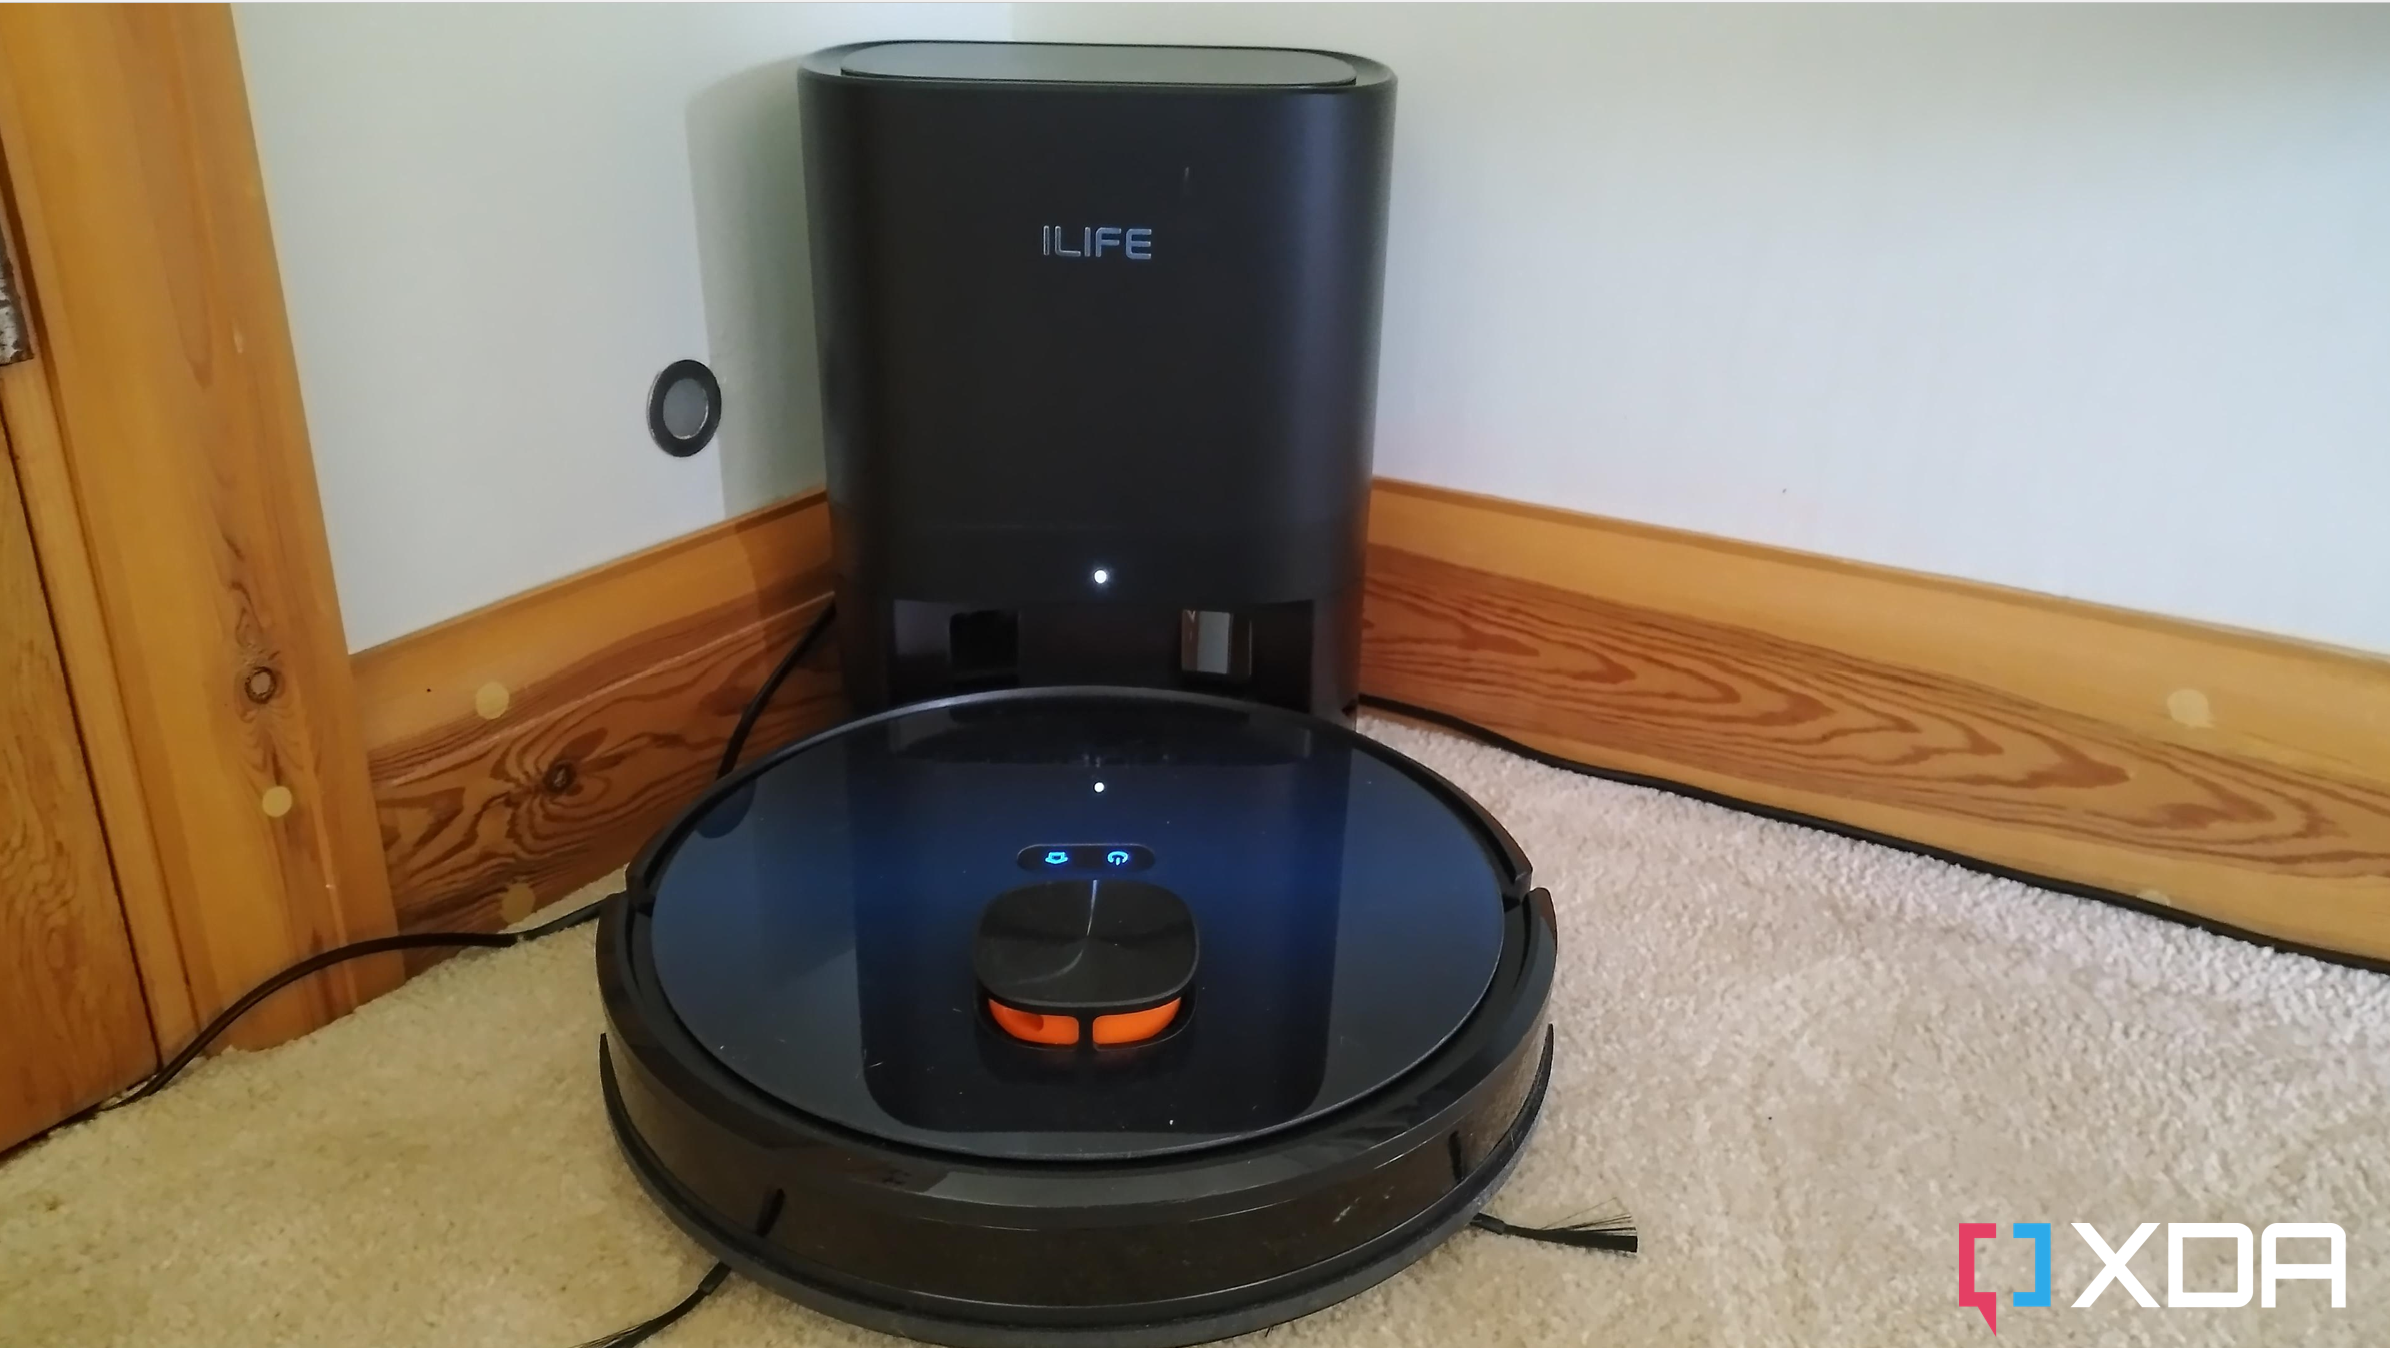 Ilife T10S robot vacuum base station eileen brown xda developers-1